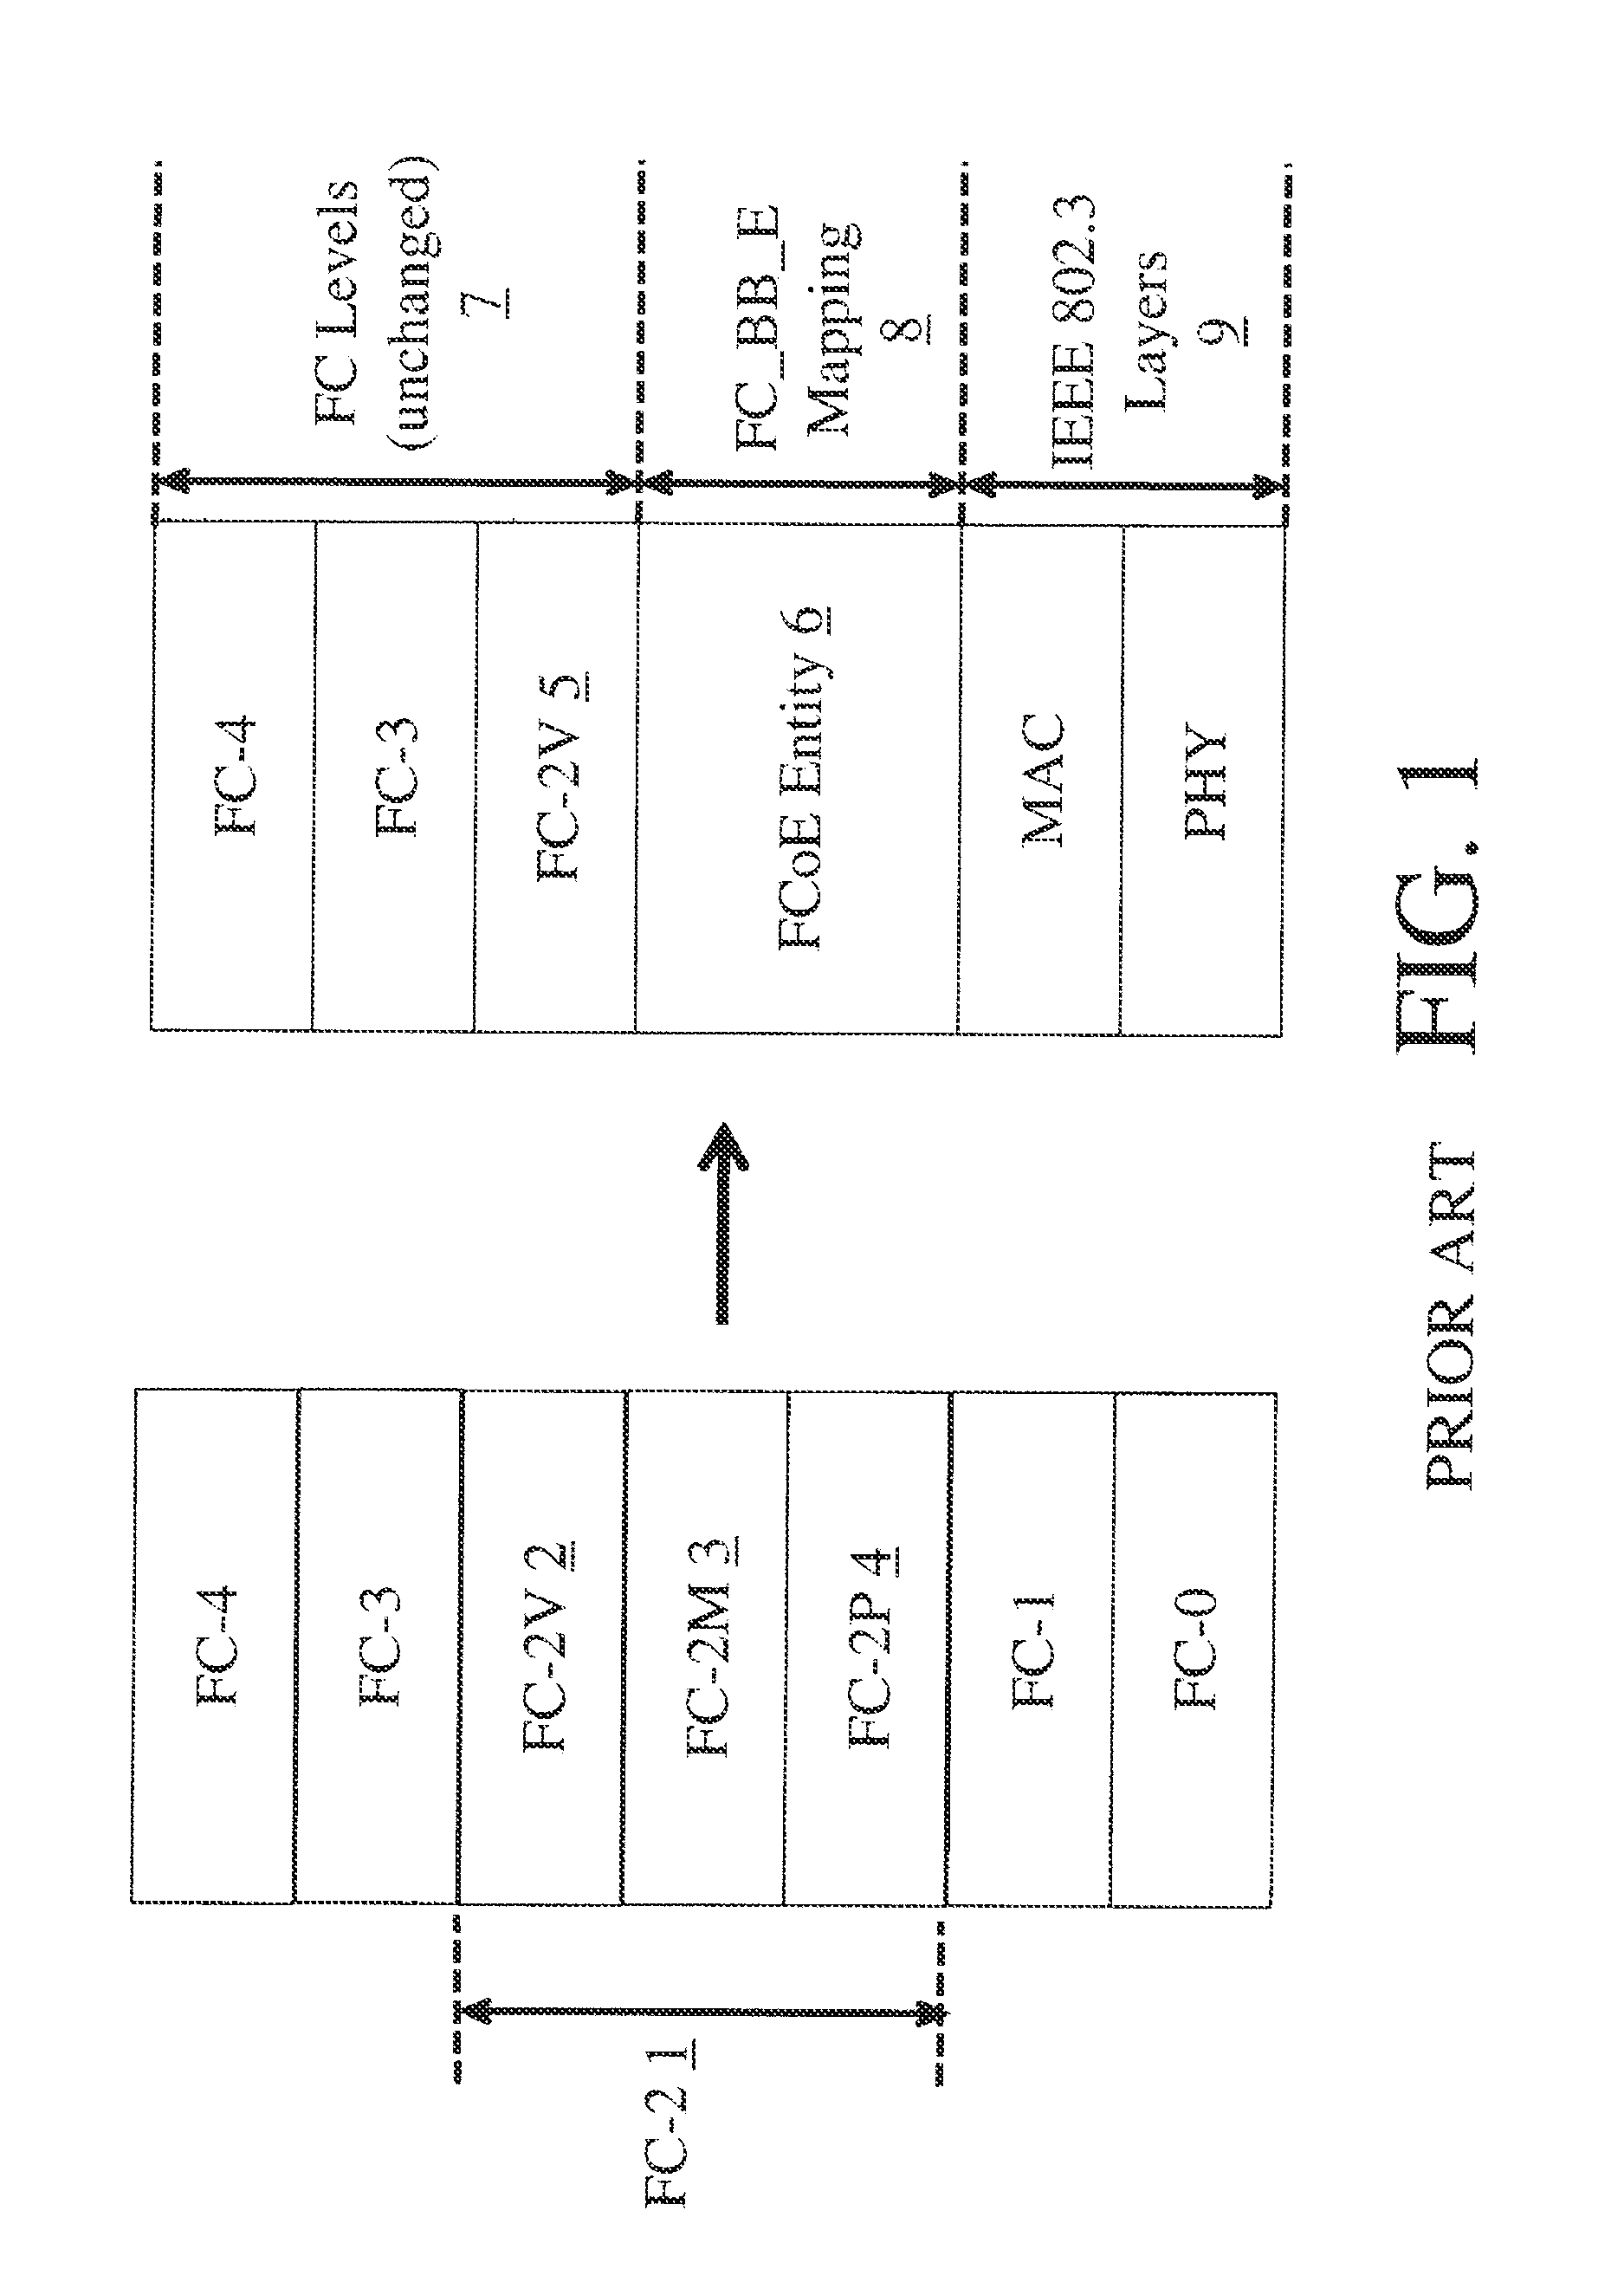 Methods for creating virtual links between fibre channel over ethernet nodes for converged network adapters